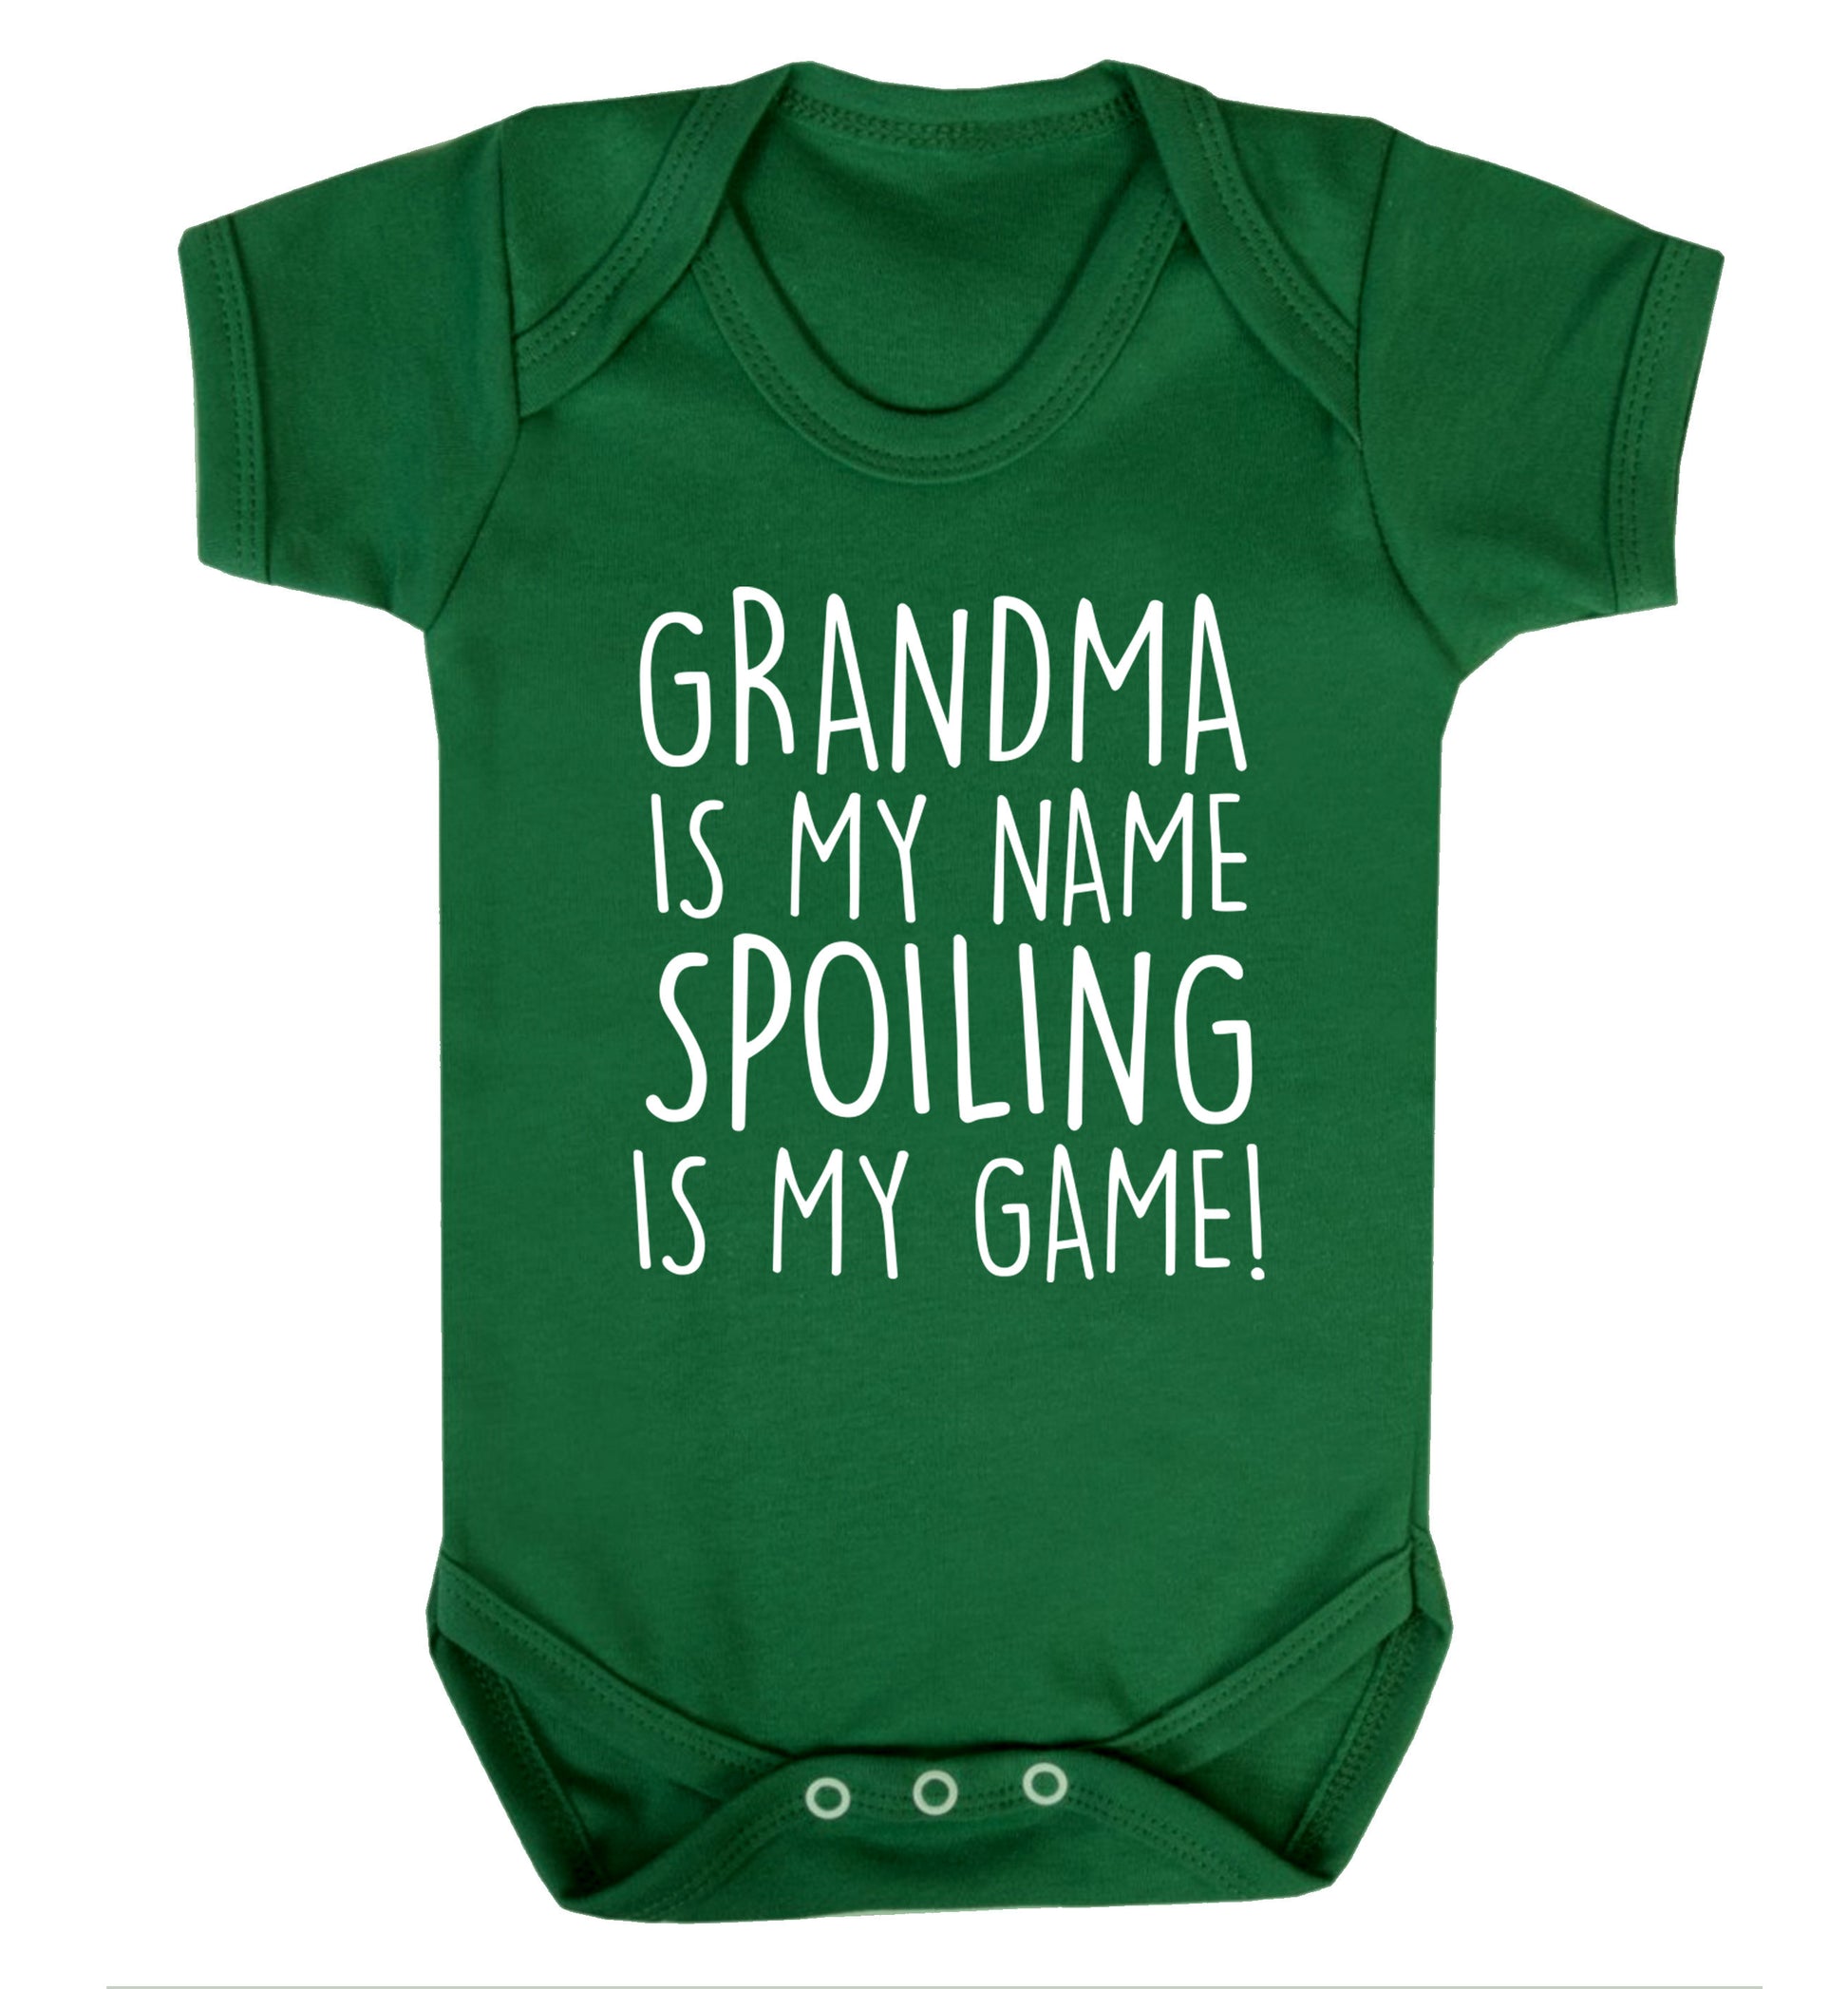 Grandma is my name, spoiling is my game Baby Vest green 18-24 months